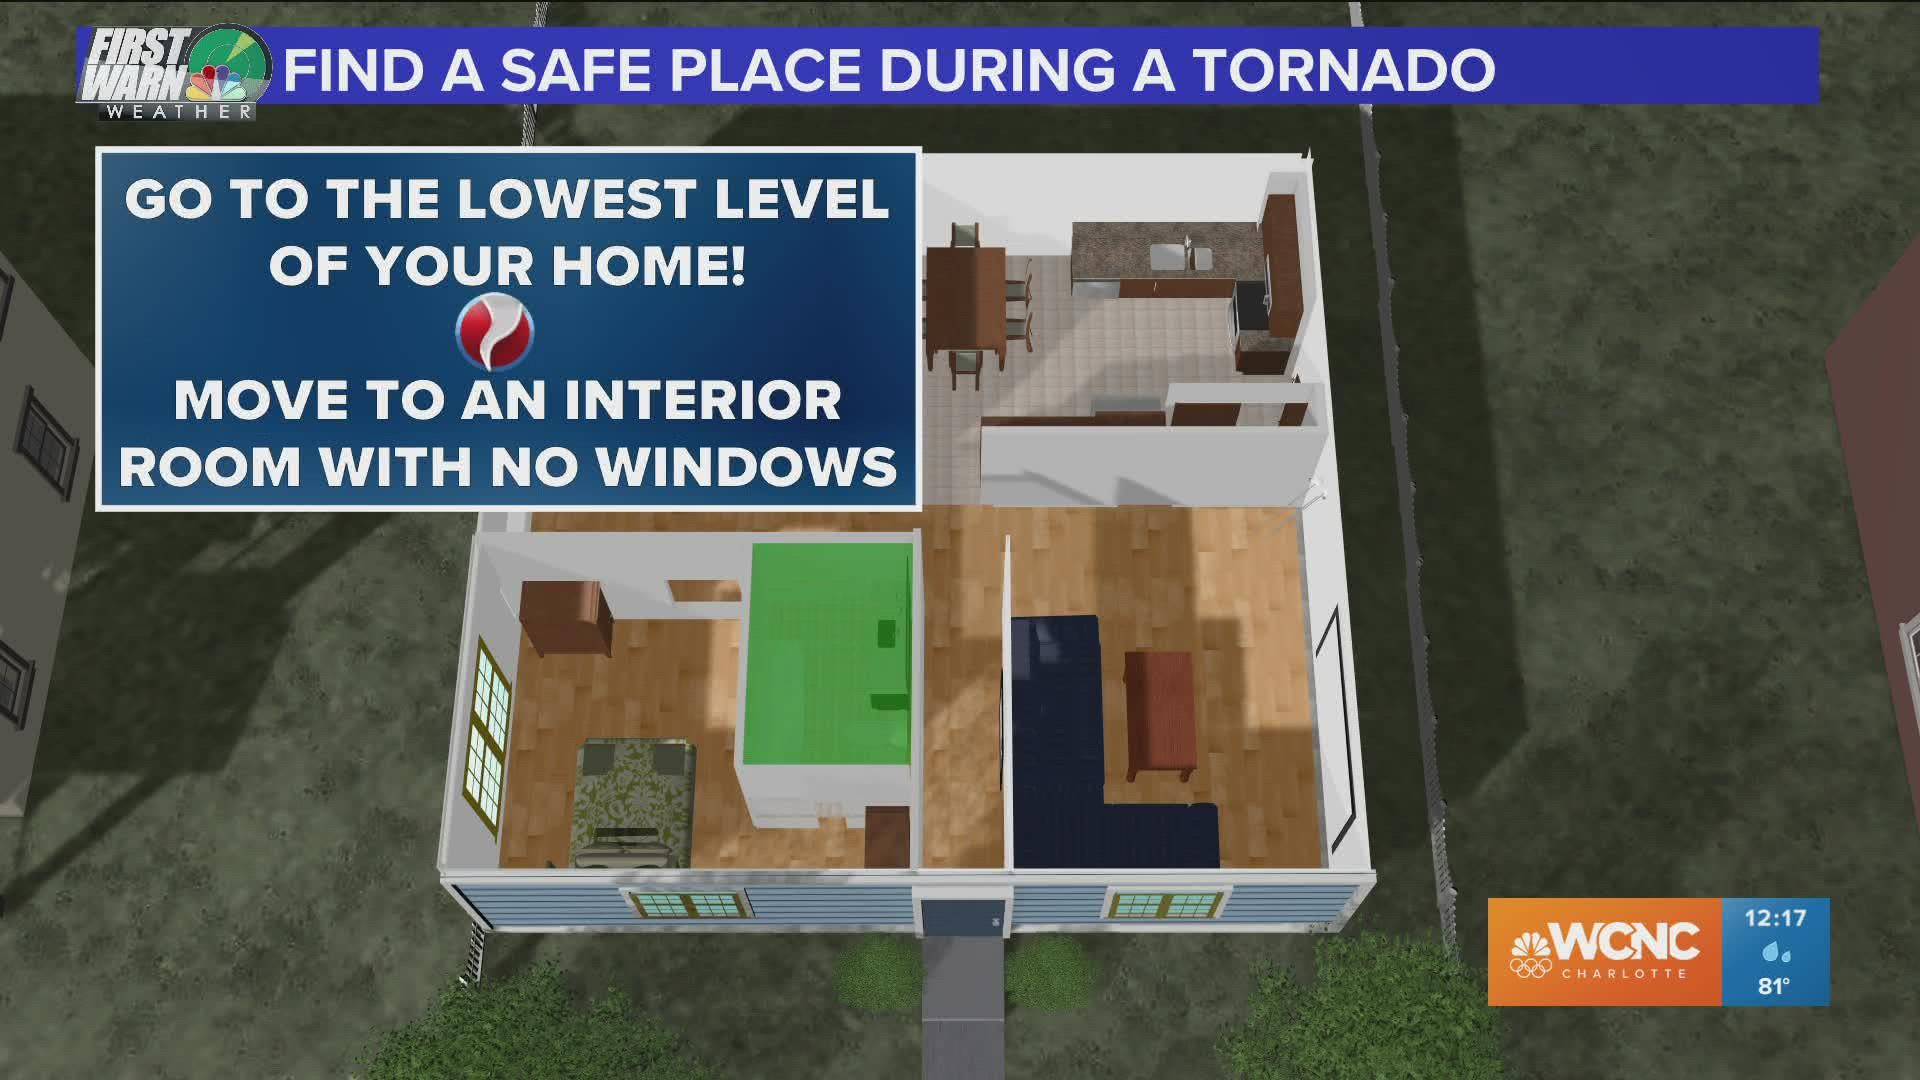 Chief meteorologist Brad Panovich shares some safe places you can find in your home during a tornado.